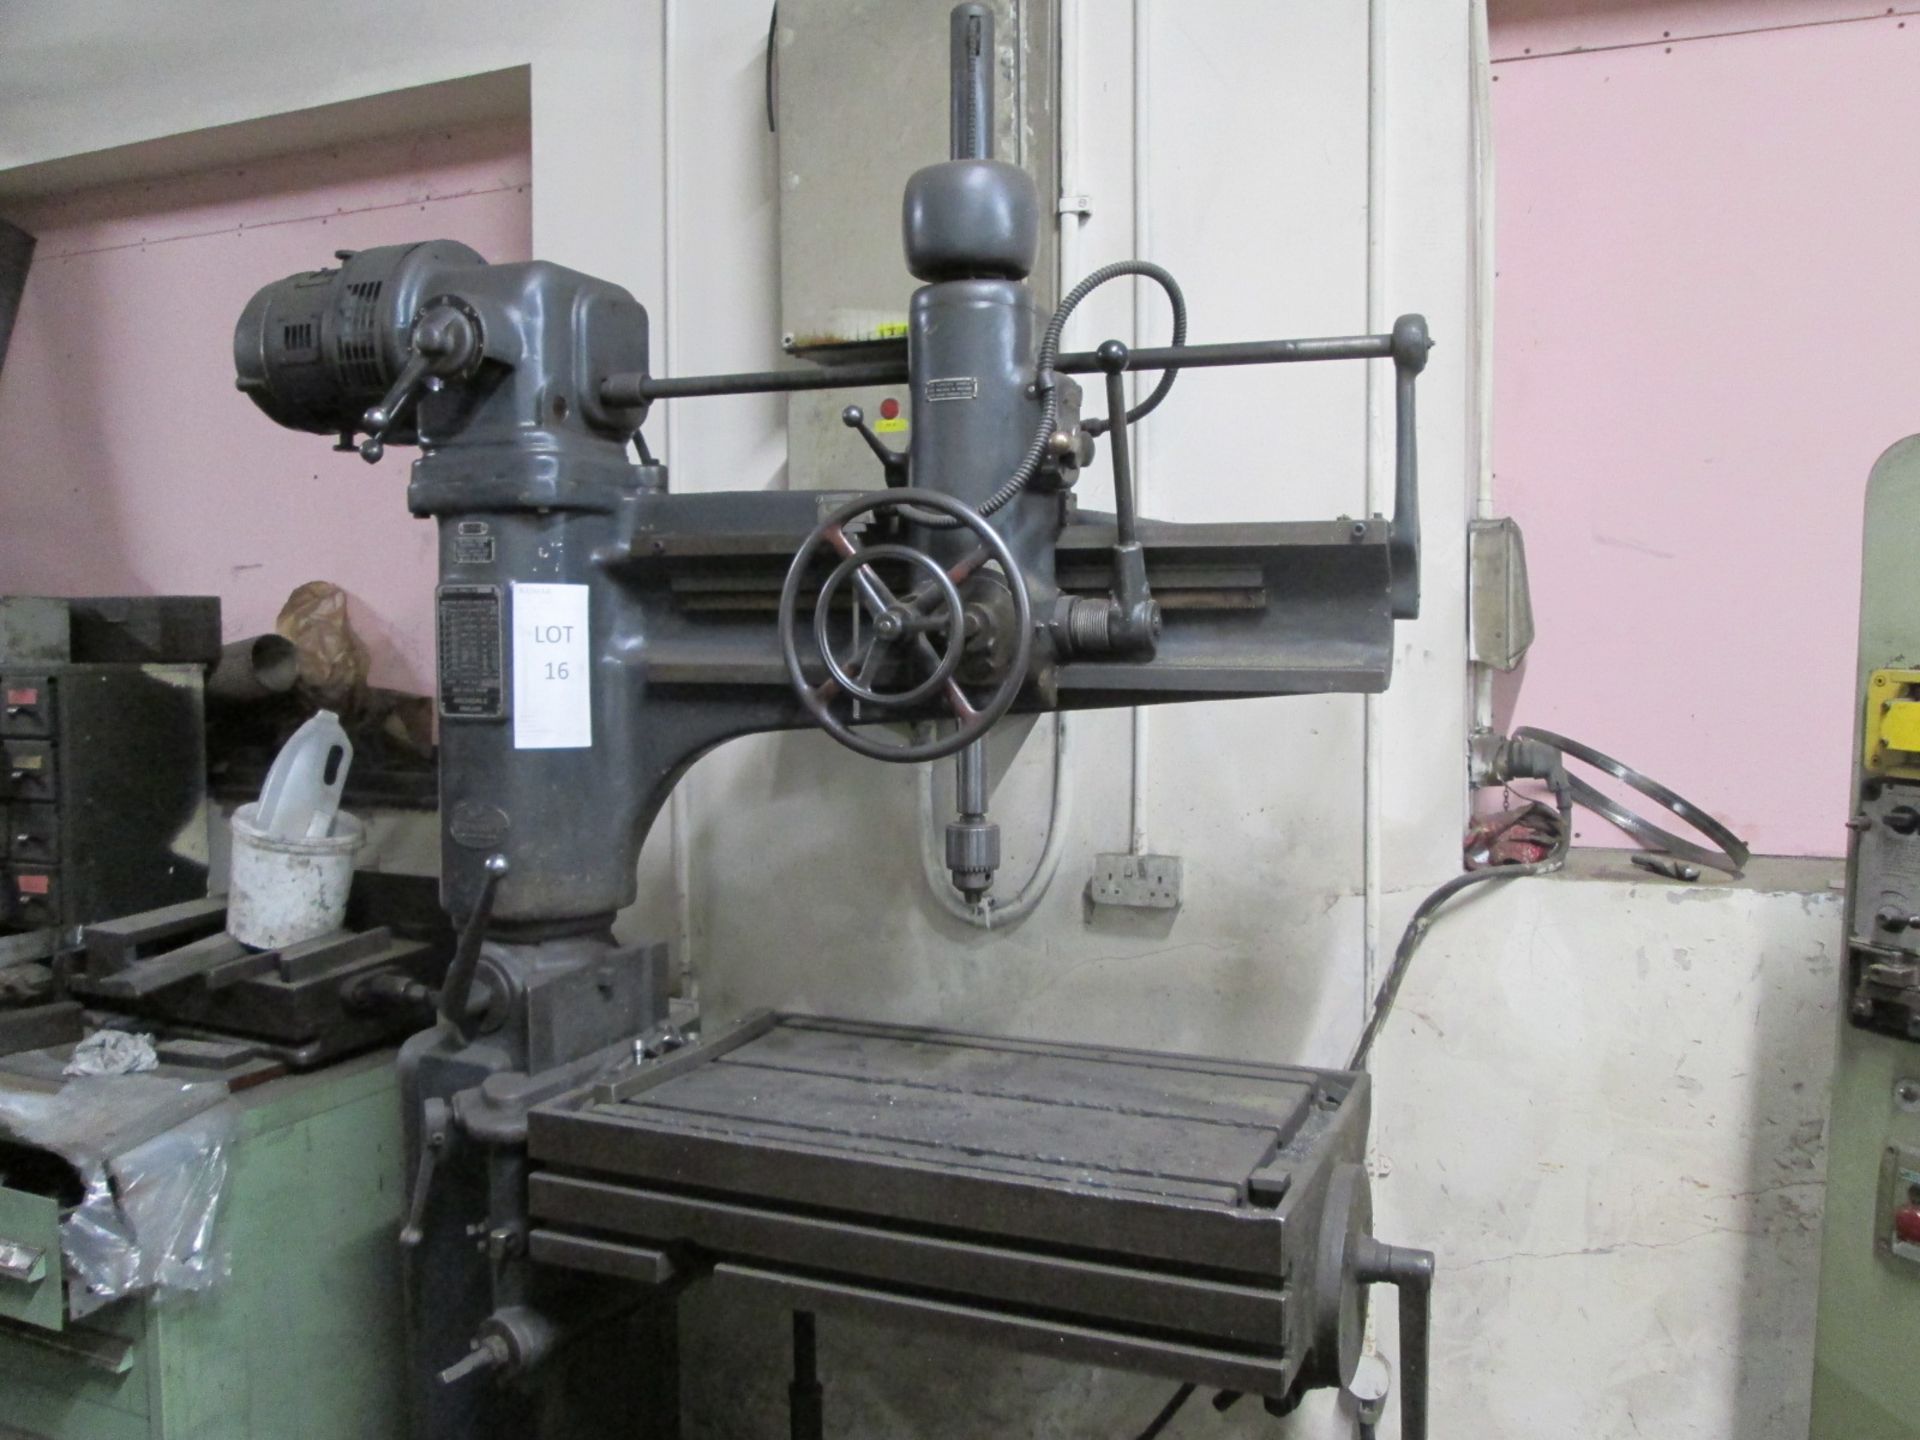 Archdale Radial Arm Drilling Machine, 3 Ft arm, Rise and fall table size 900 mm x 560 mm, Spindle